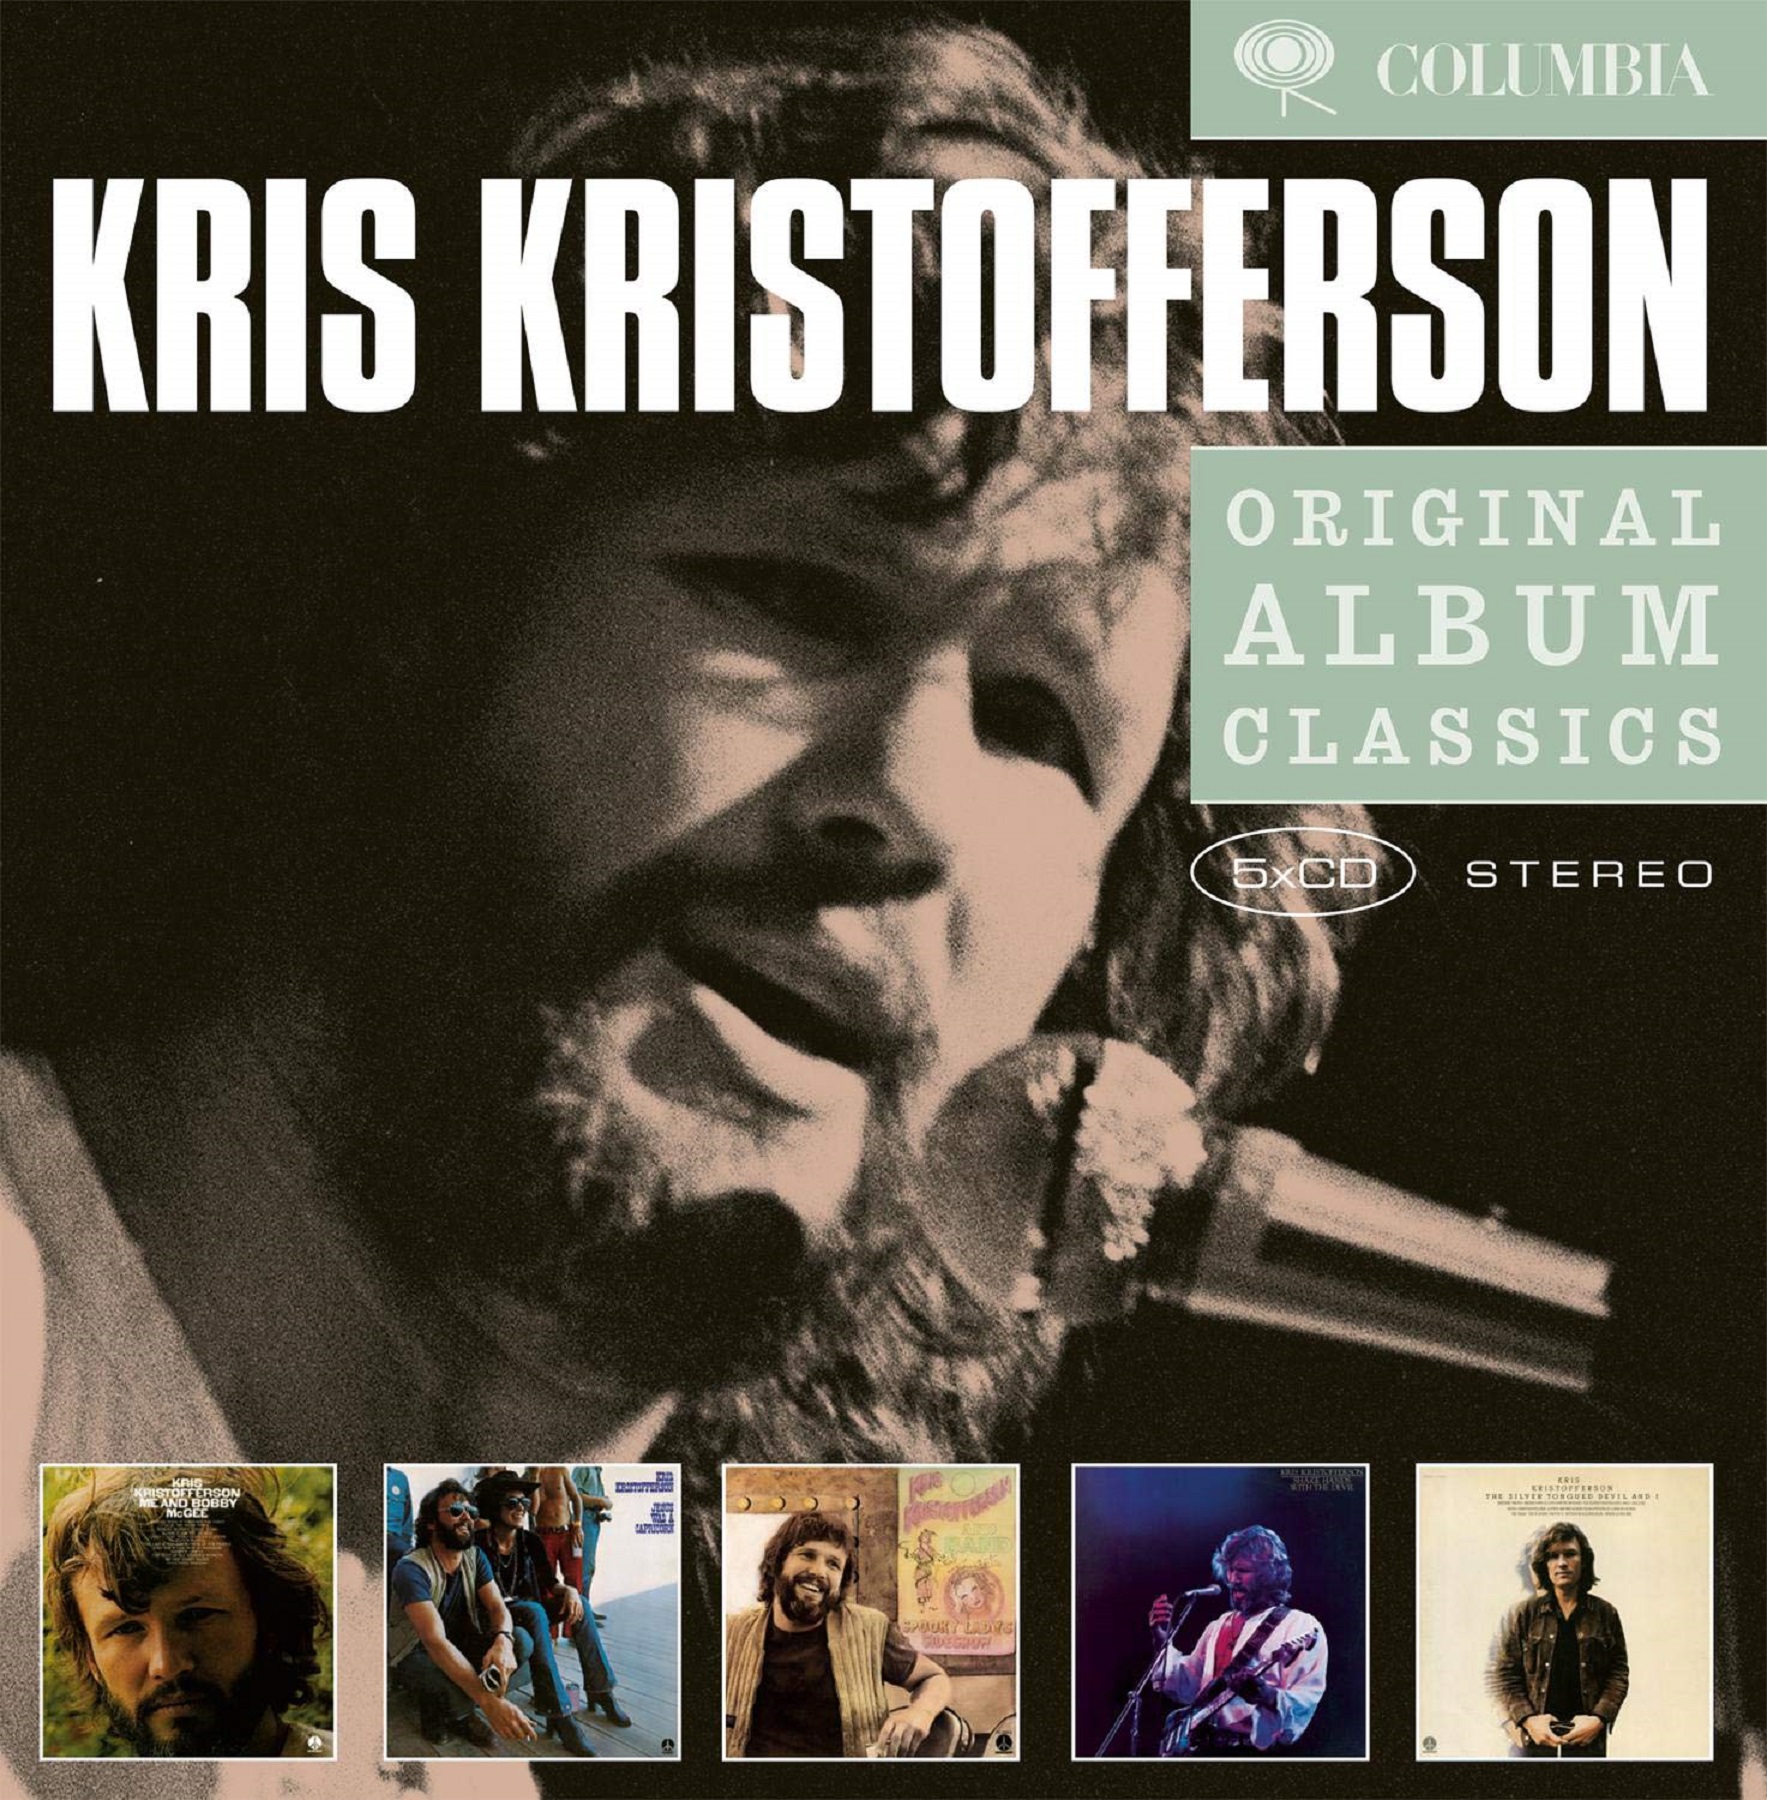 Kris Kristofferson: The Poet of the Open Road